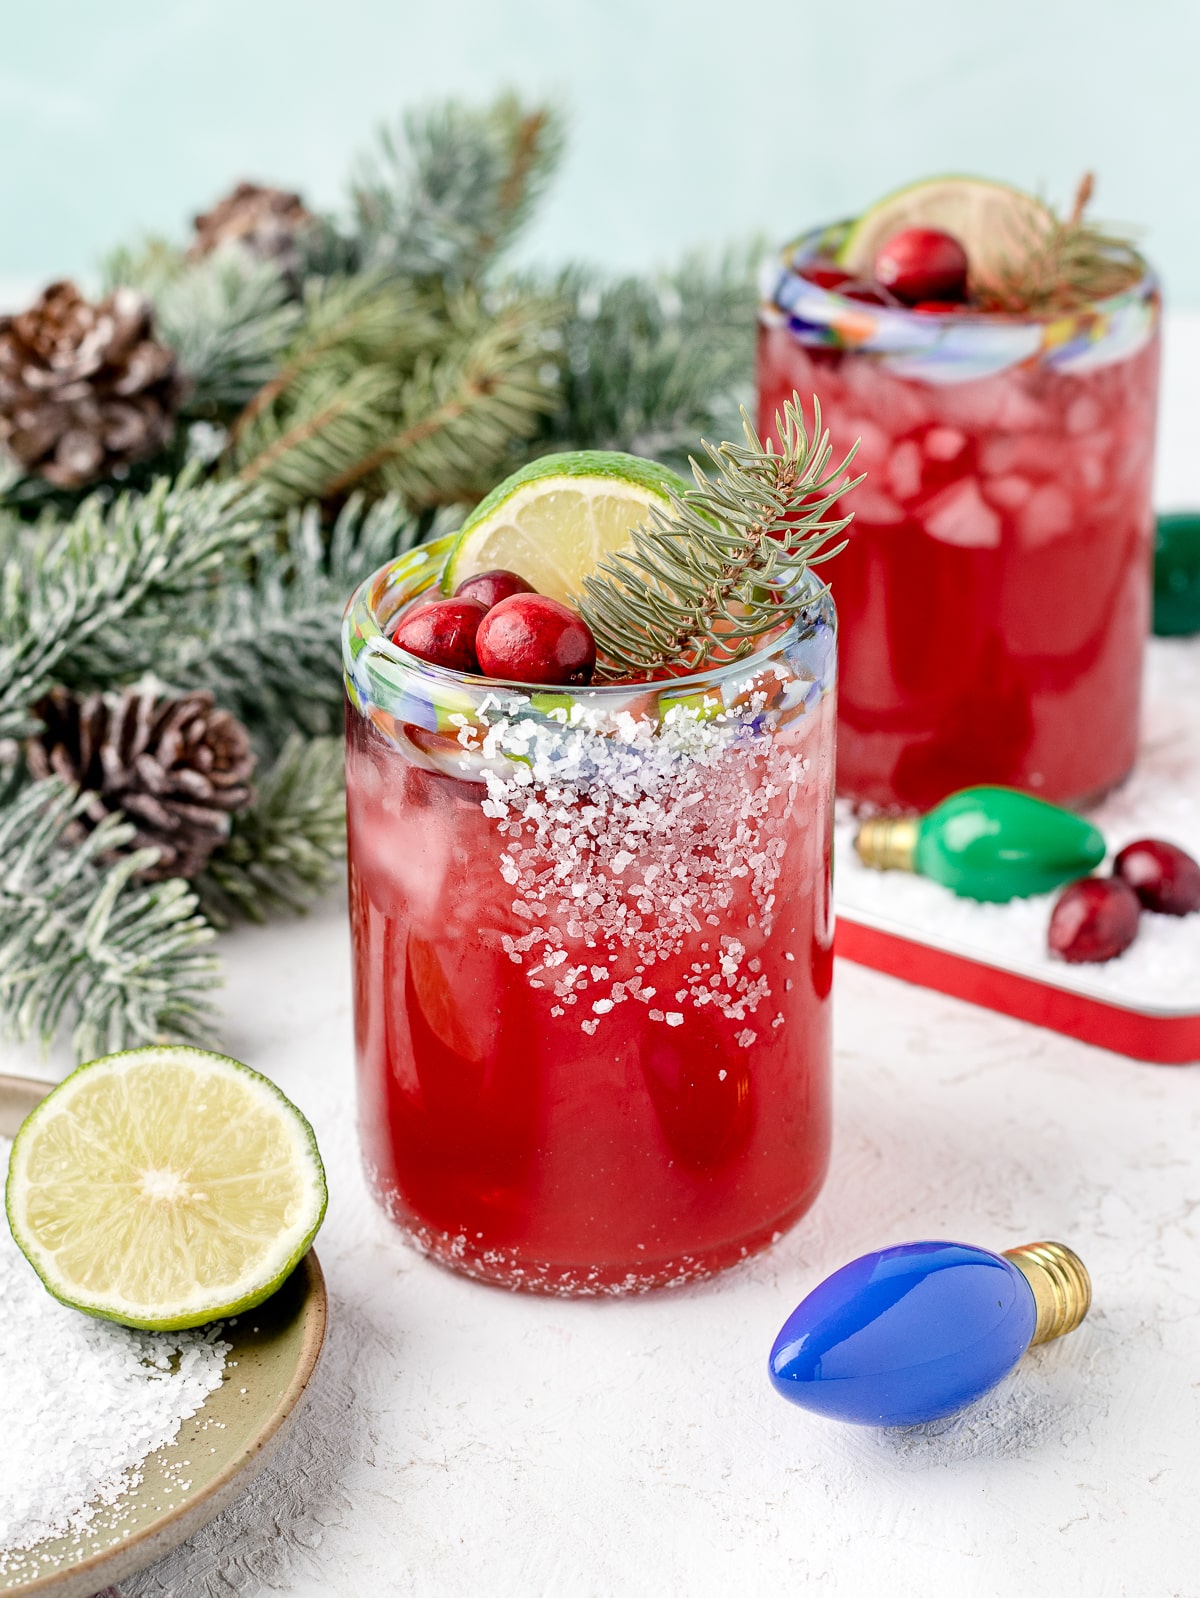 Alcohol free cranberry margarita mocktail with salted glass, lime slice, and fresh cranberry garnish.